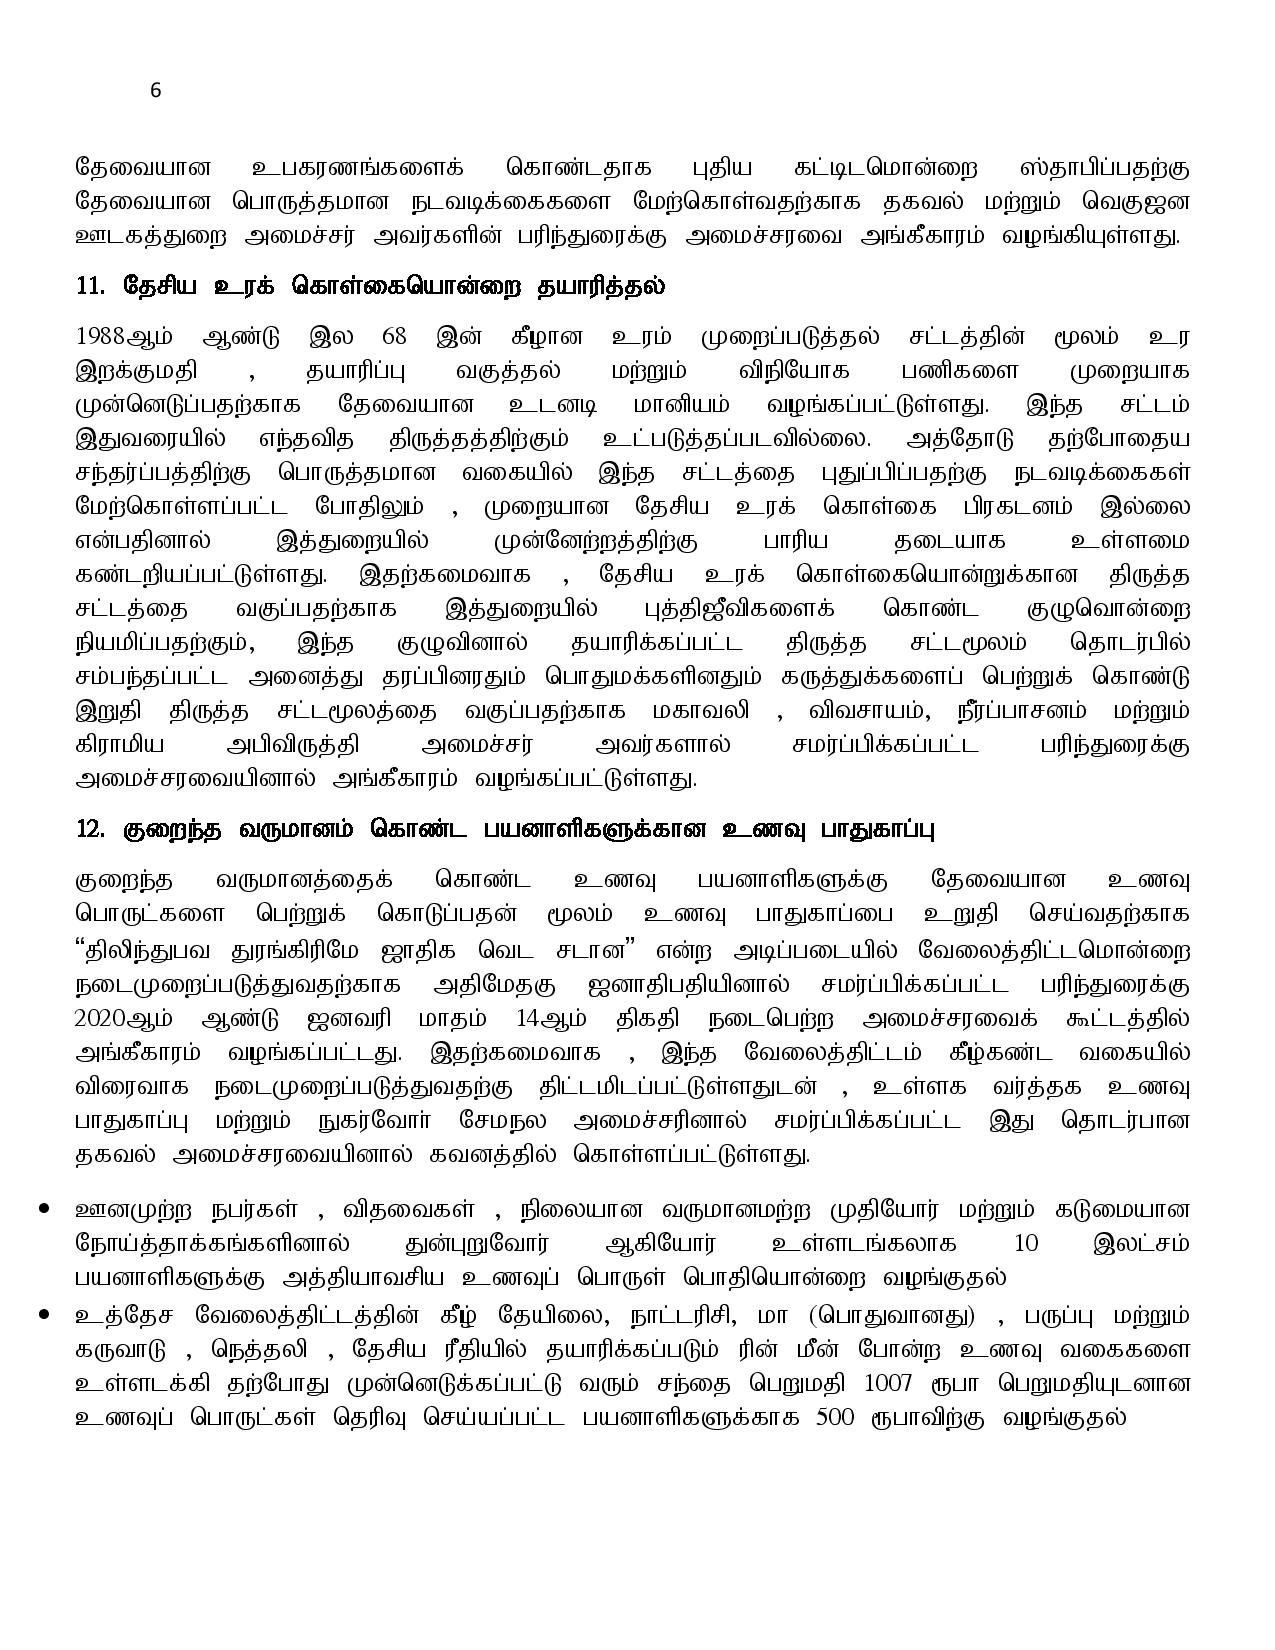 04.03.2020 cabinet Tamil page 006